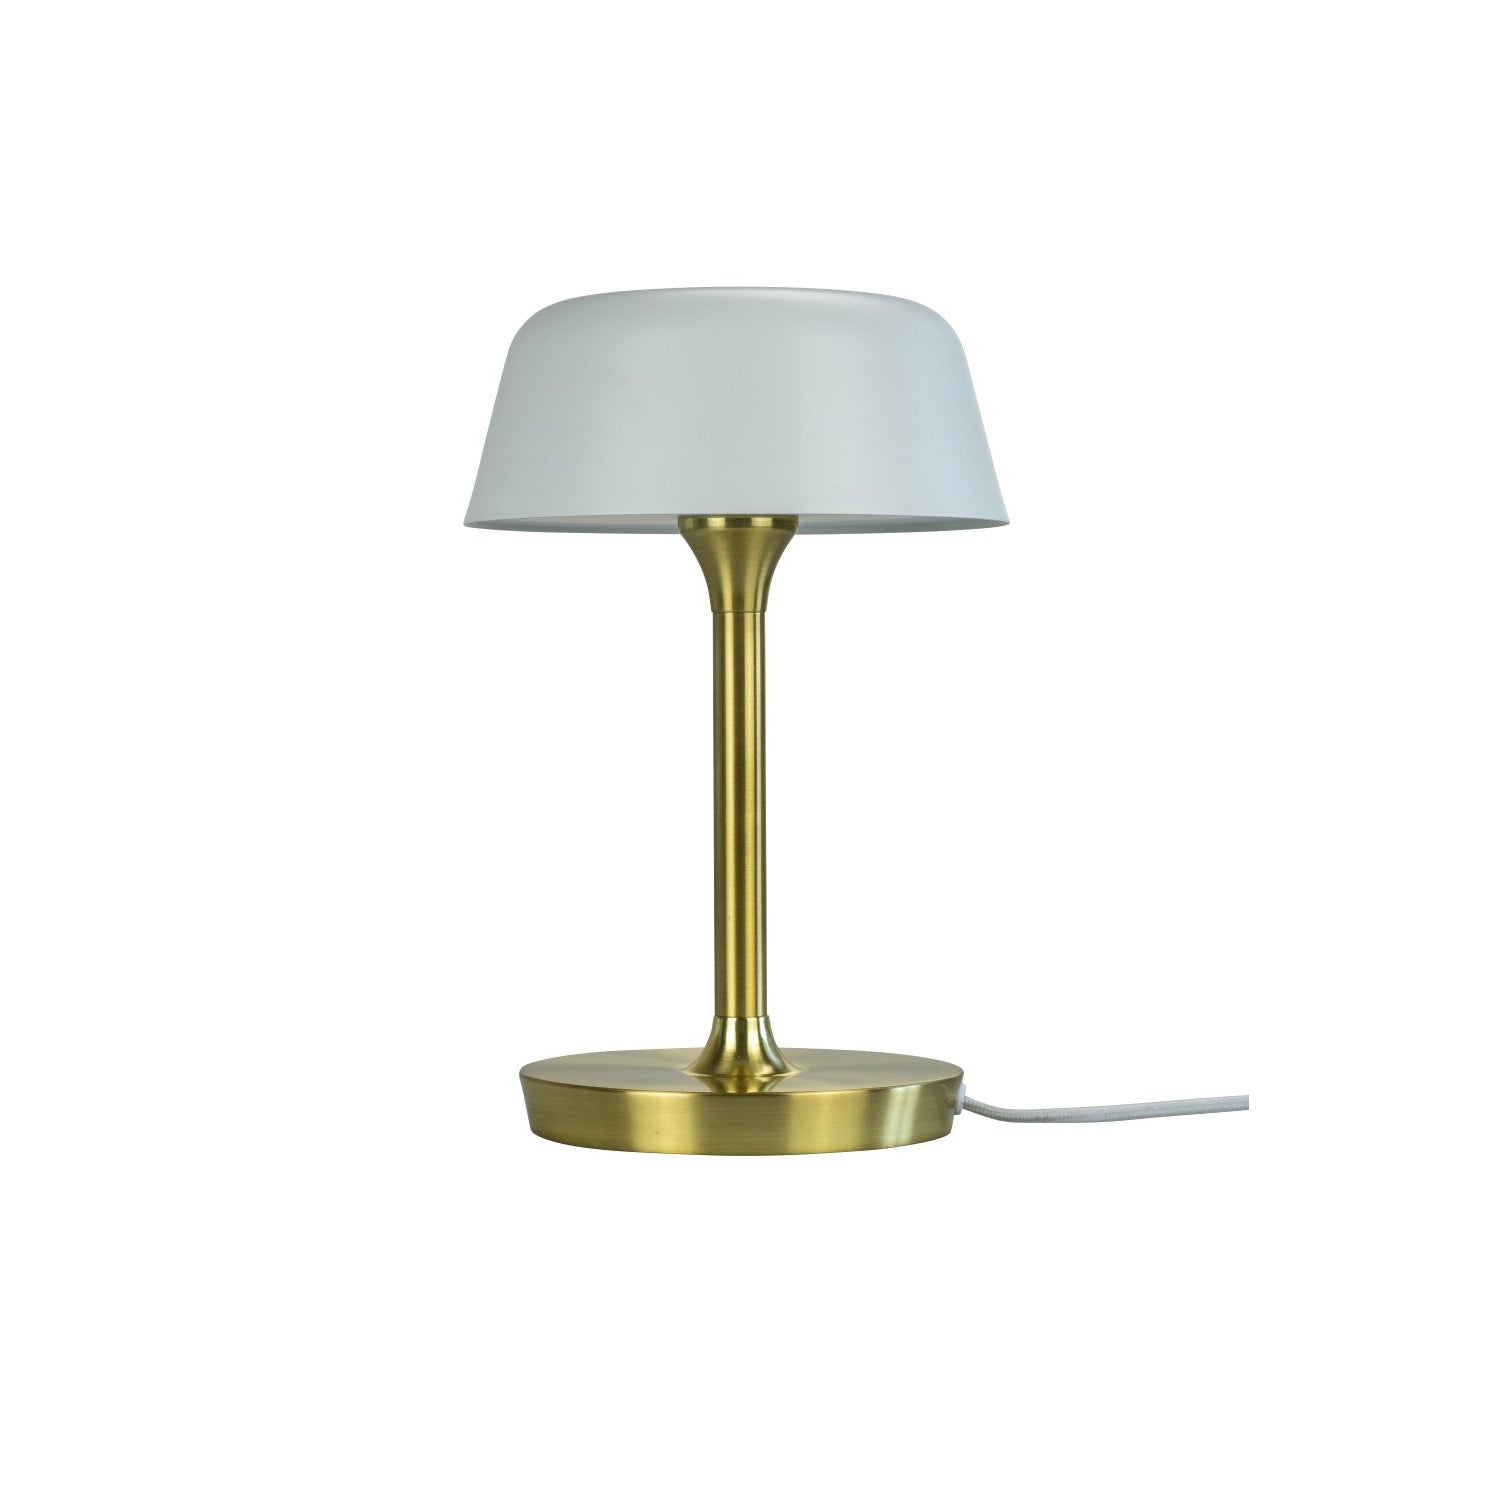 Dyberg Larsen Valencia Led Table Lamp With Wire, White/Brass